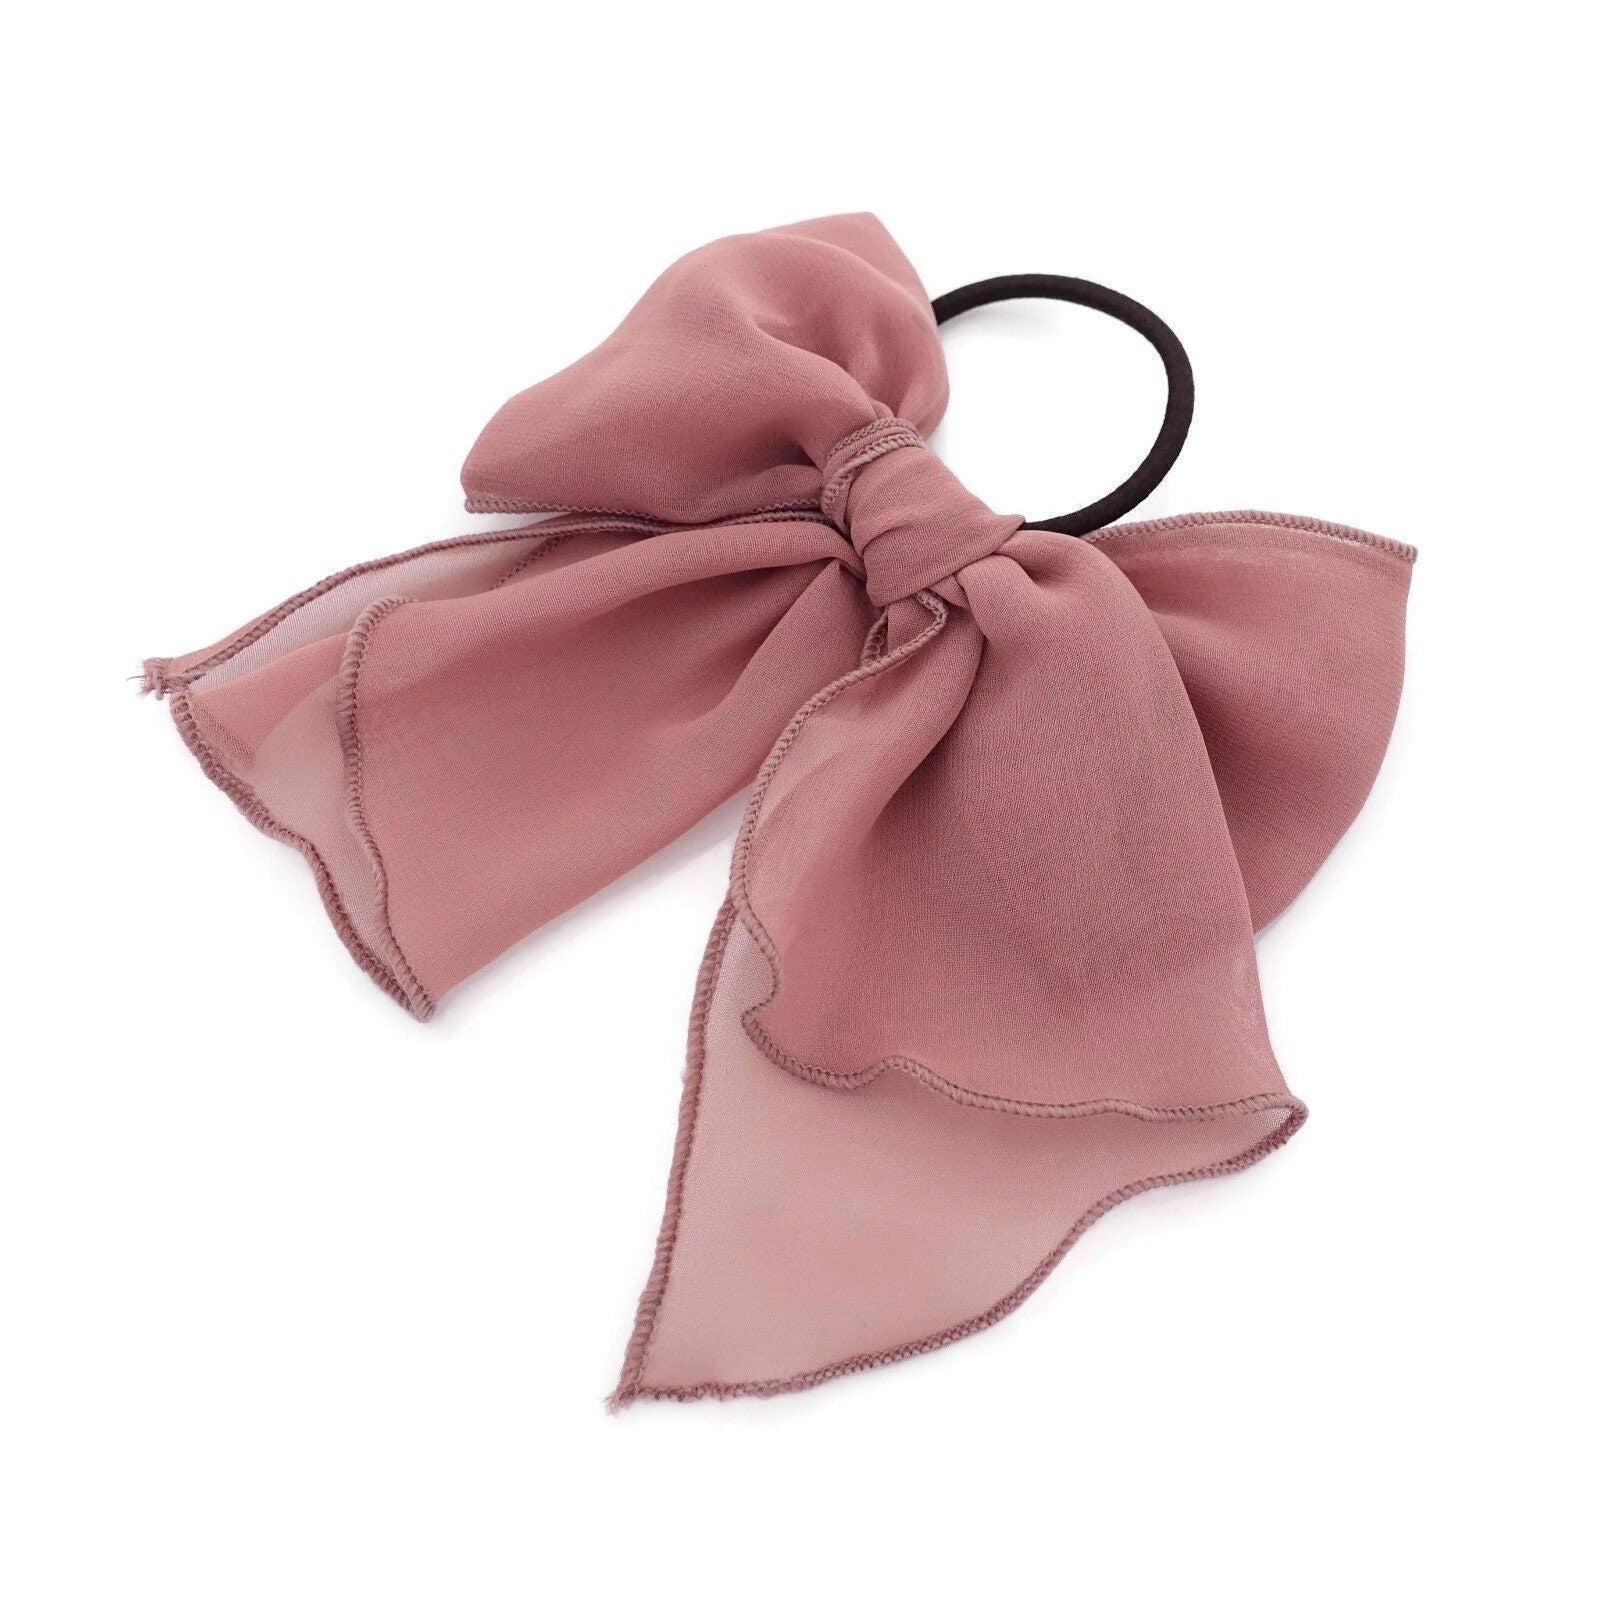 veryshine.com Scrunchies Chiffon solid color bow knot hair tie elastic ponytail holder for women